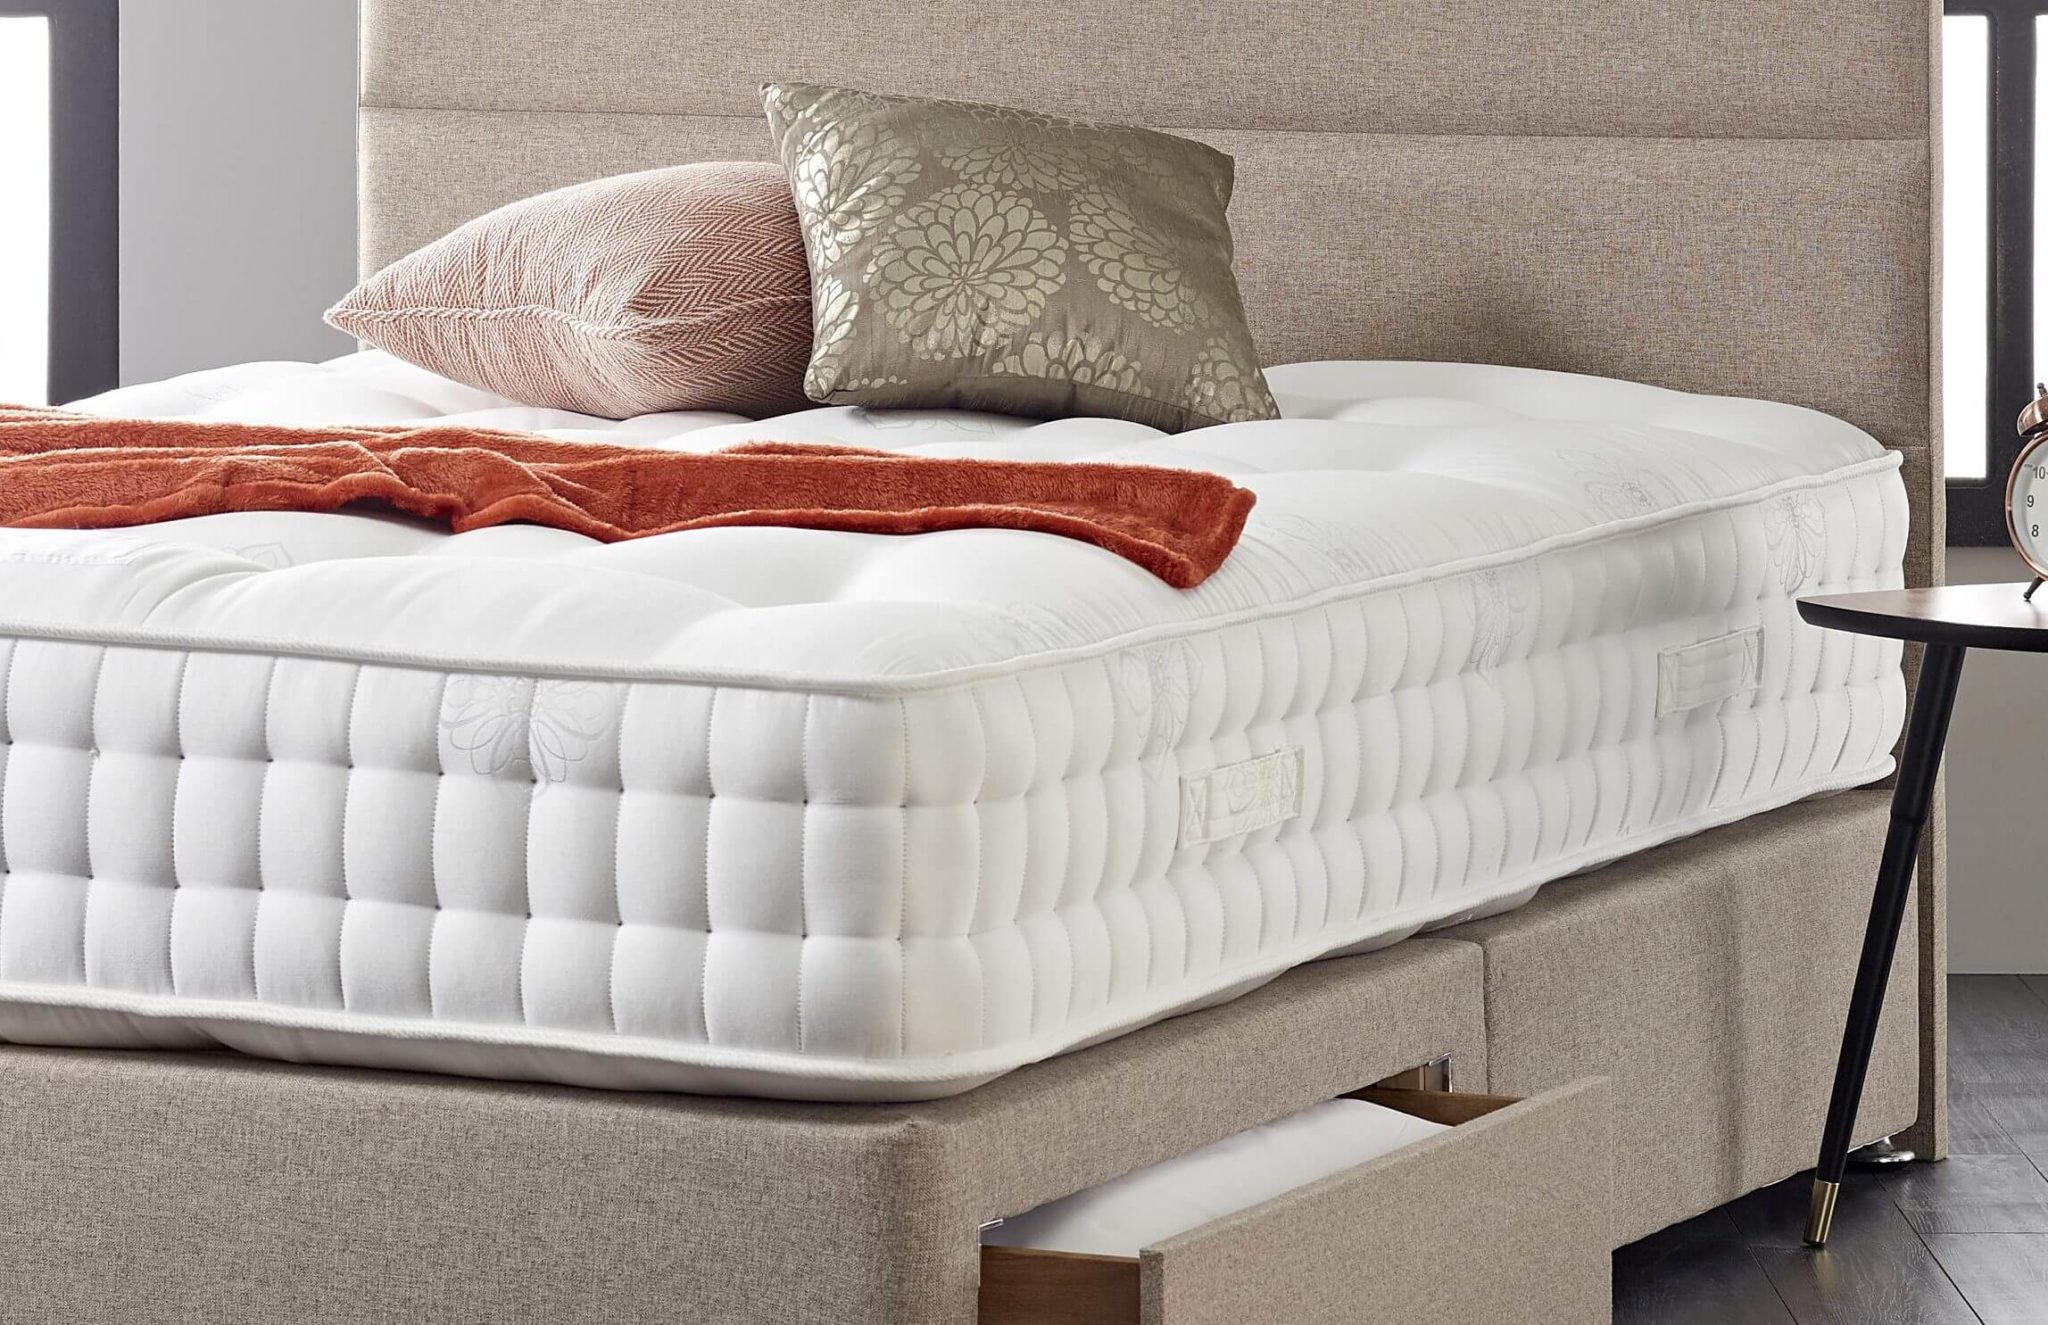 mattresses rated higher than sleep number